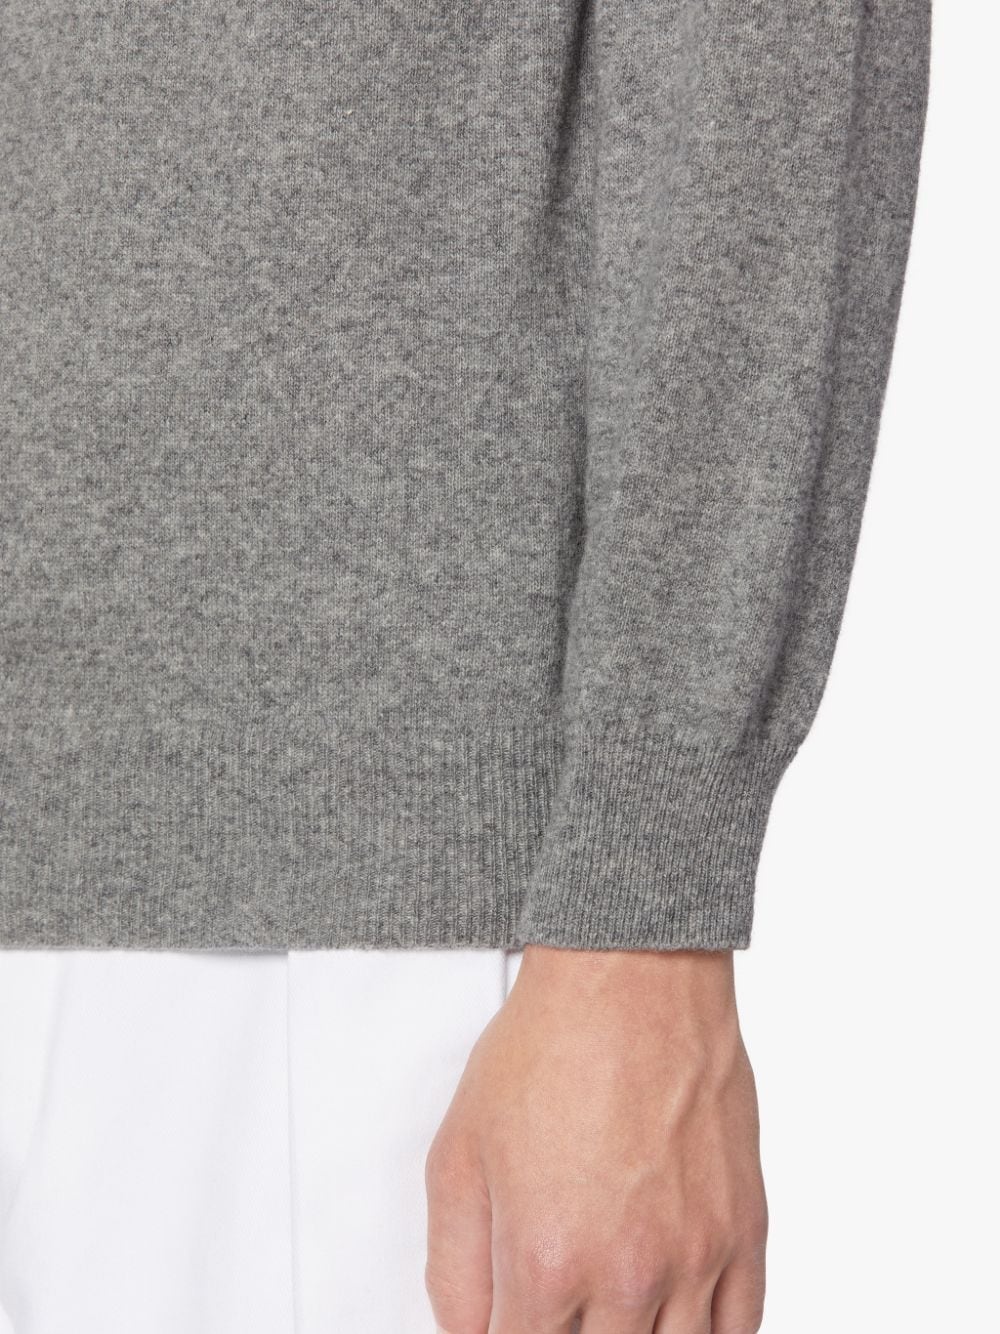 IN AND OUT GREY WOOL SWEATER | GKM-203 - 6